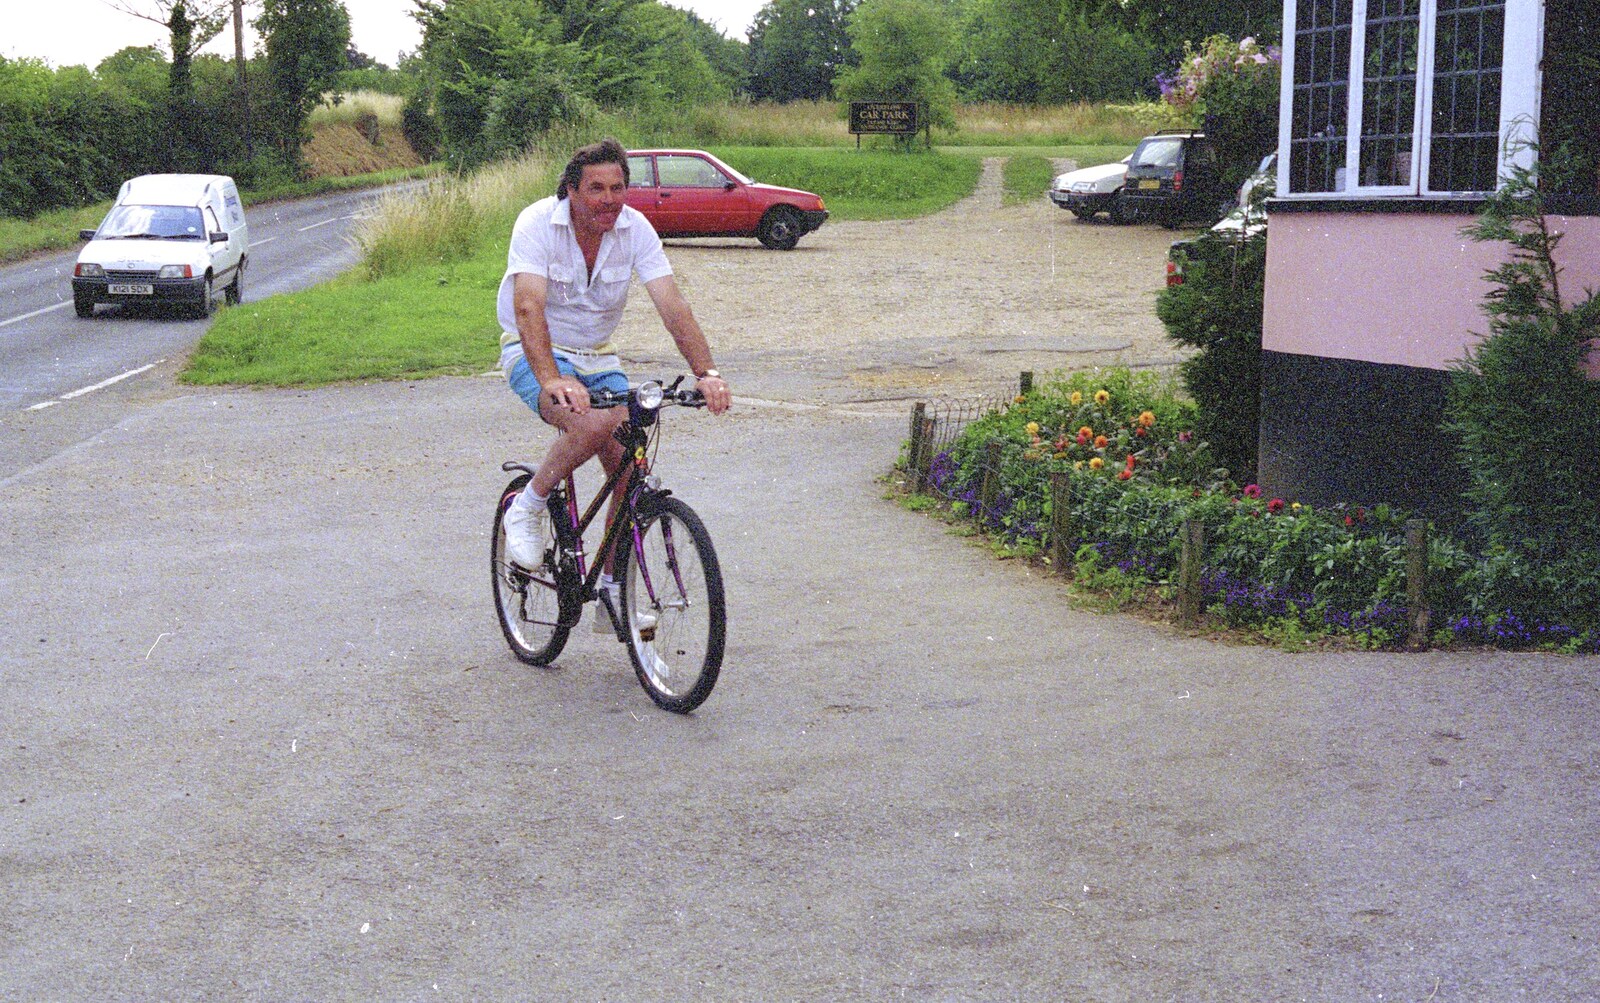 The First-Ever BSCC Sponsored Ride, Suffolk - 2nd June 1995: Alan pulls in to the car park of the Finningham White Horse